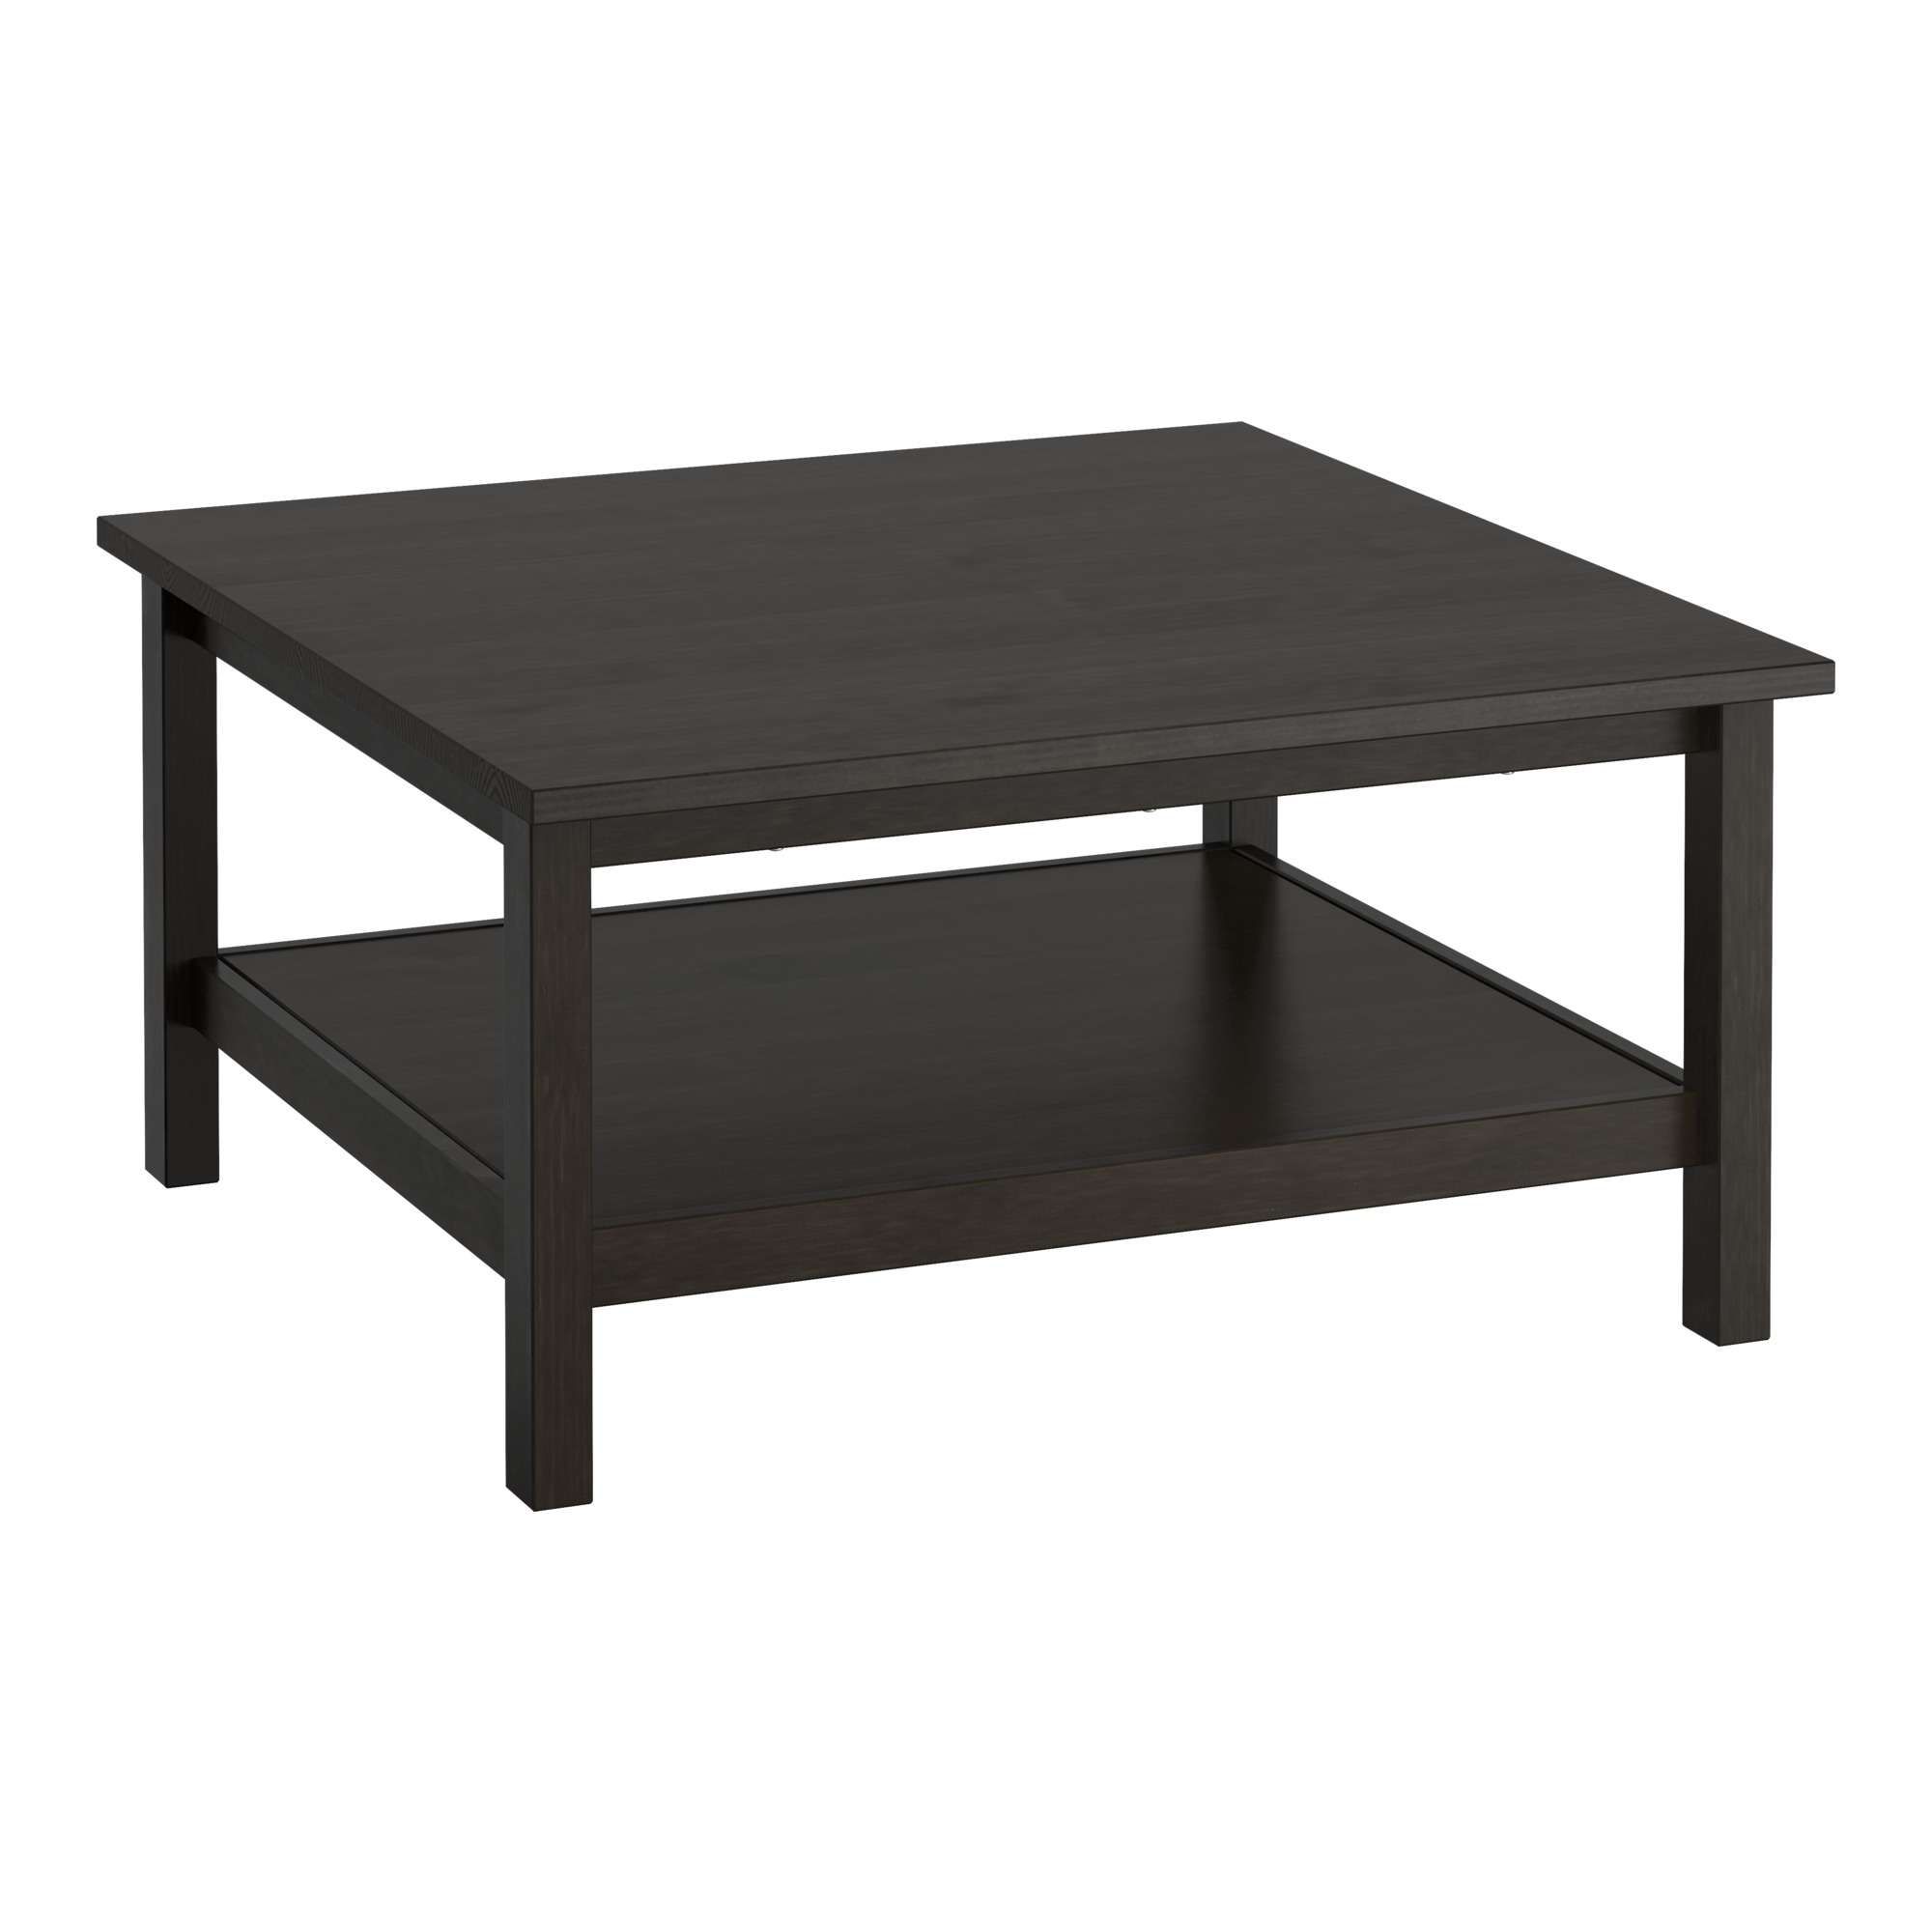 Widely Used White Square Coffee Table Intended For Hemnes Coffee Table – Black Brown – Ikea (View 12 of 20)